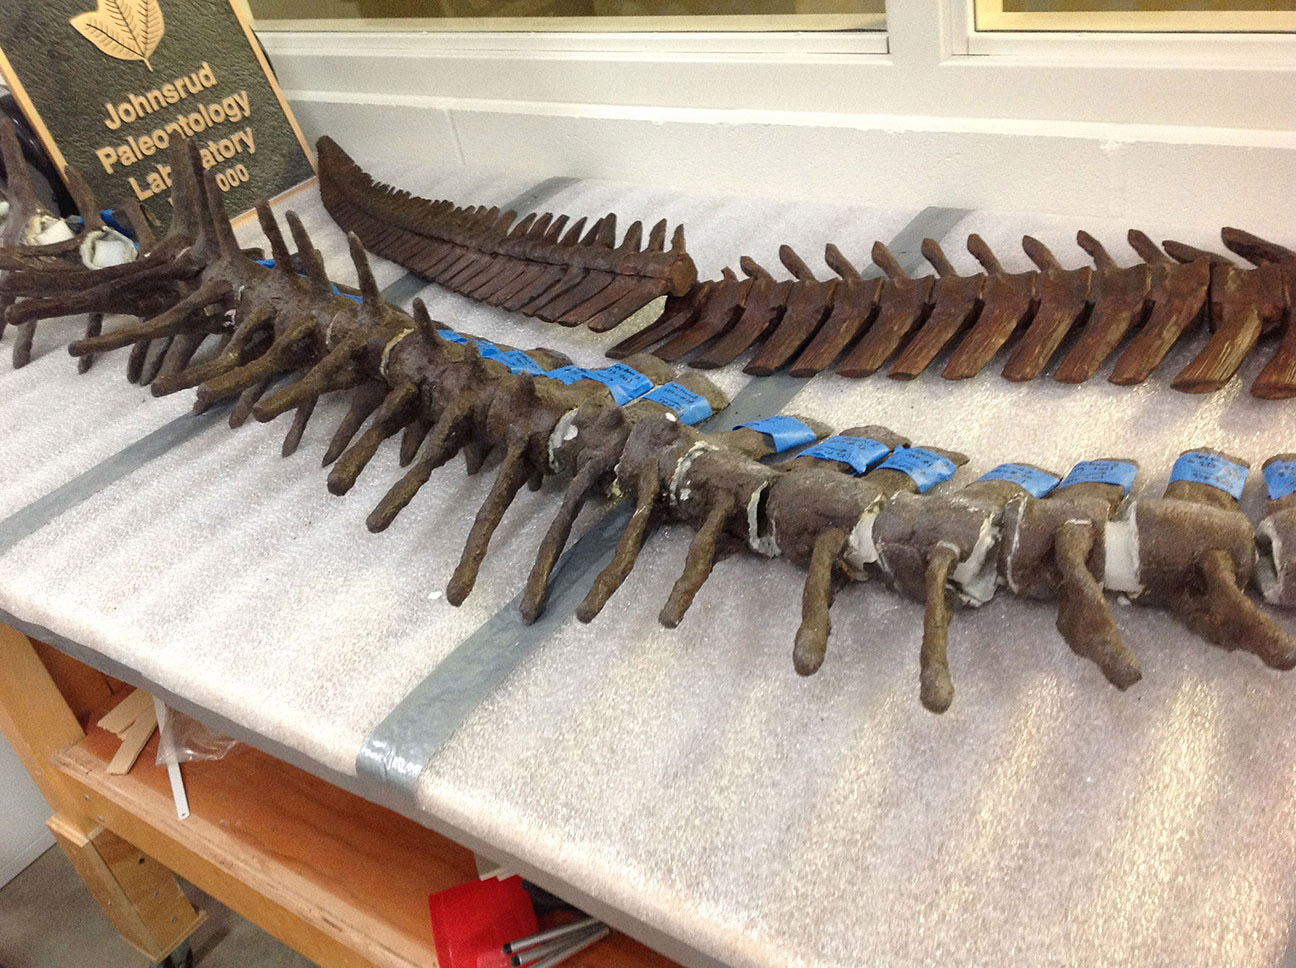 Some pieces are completely replaced for exhibit to protect the fossil from damage. This Mosasaur backbone will be completely replaced by carefully sculpted foam pieces so that the fossil can be preserved. The vertebrae to the rear of the photo are sculpted from foam. The vertebrae in the front of the photo are actual fossils.